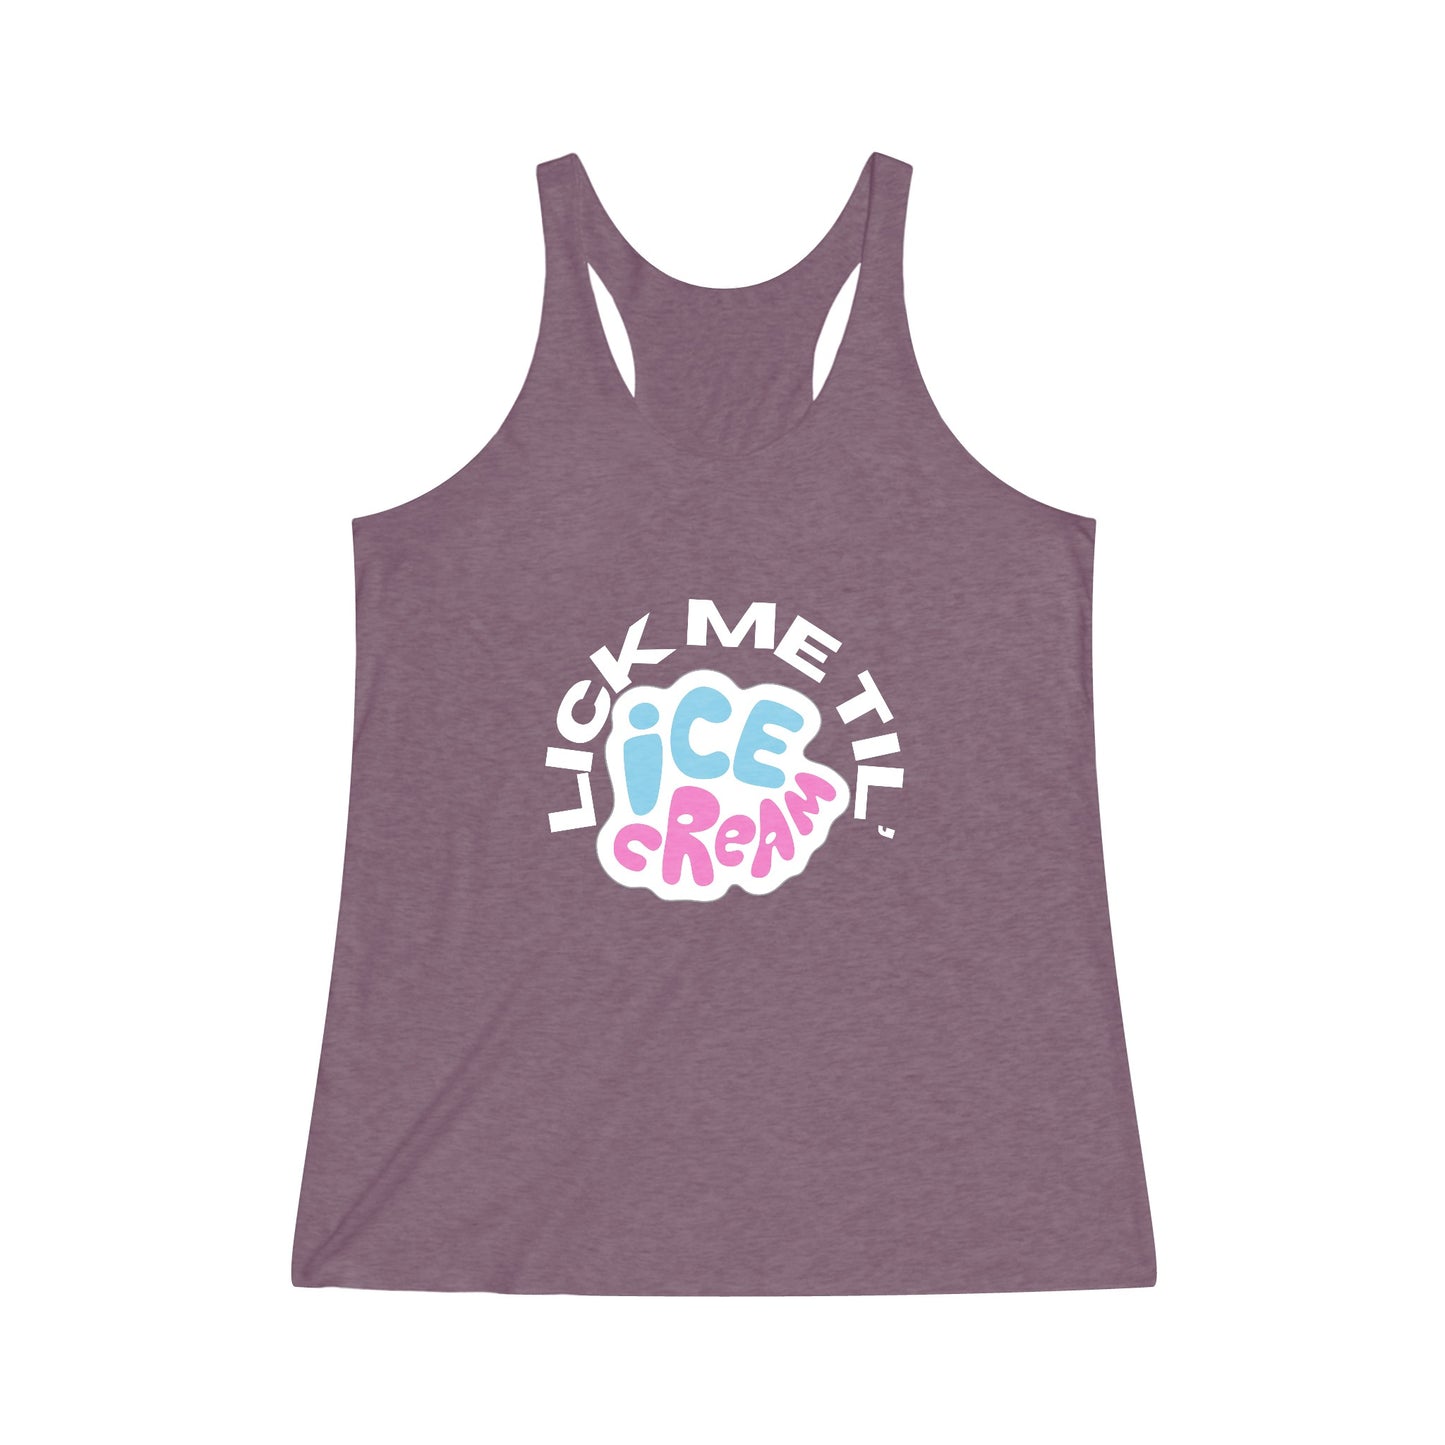 The Stamina for Men Lick me till Ice cream woman's fitted vintage purple tank top product shot with white background